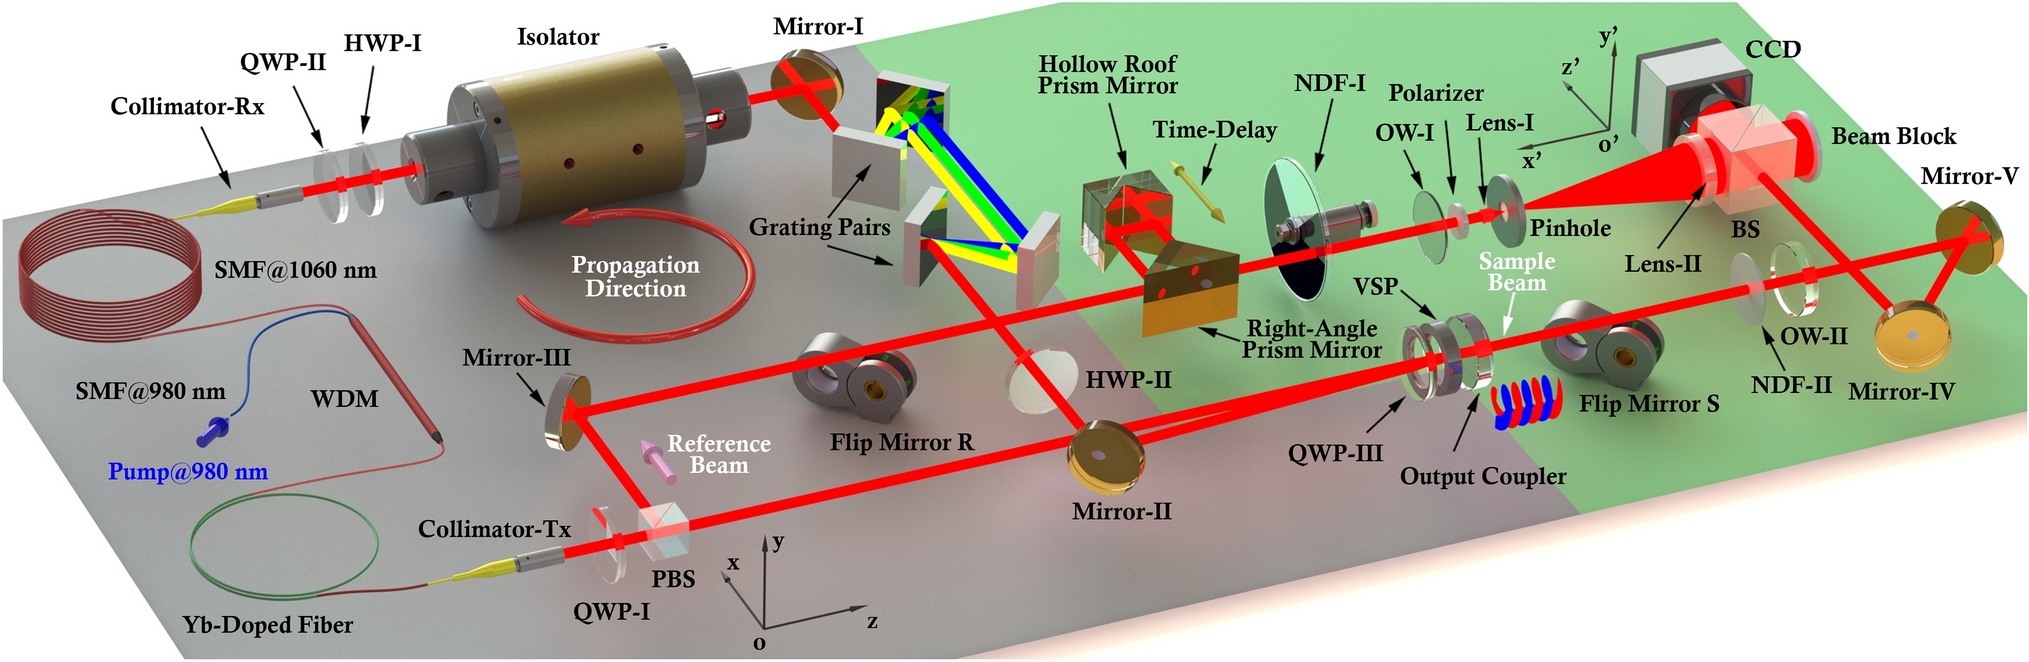 Integrated Pulse Scope For Tunable Generation And Intrinsic Characterization Of Structured Femtosecond Laser Scientific Reports